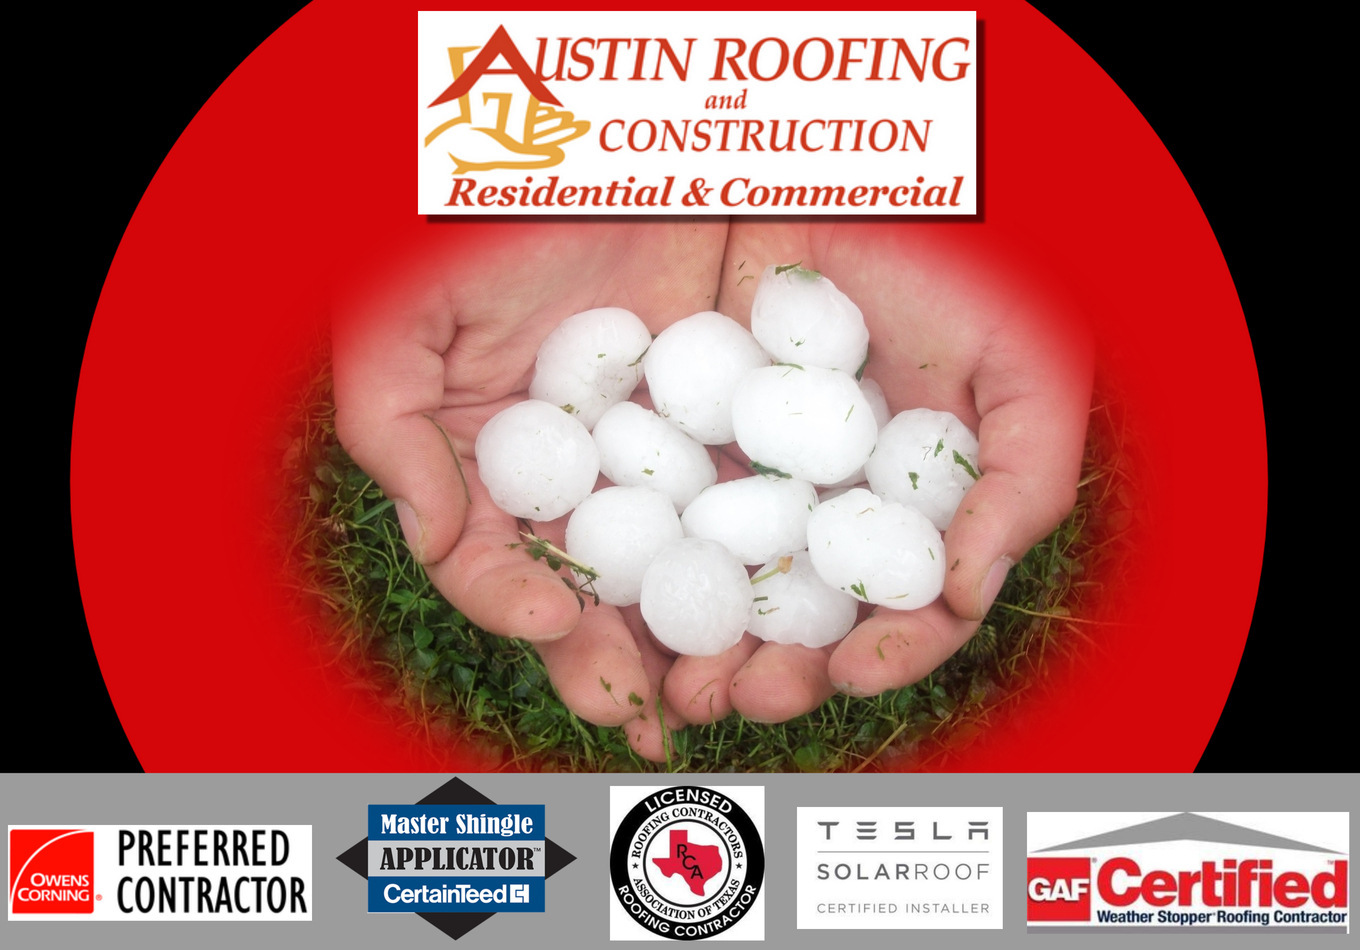 Austin Roofing and Construction, Thursday, May 27, 2021, Press release picture